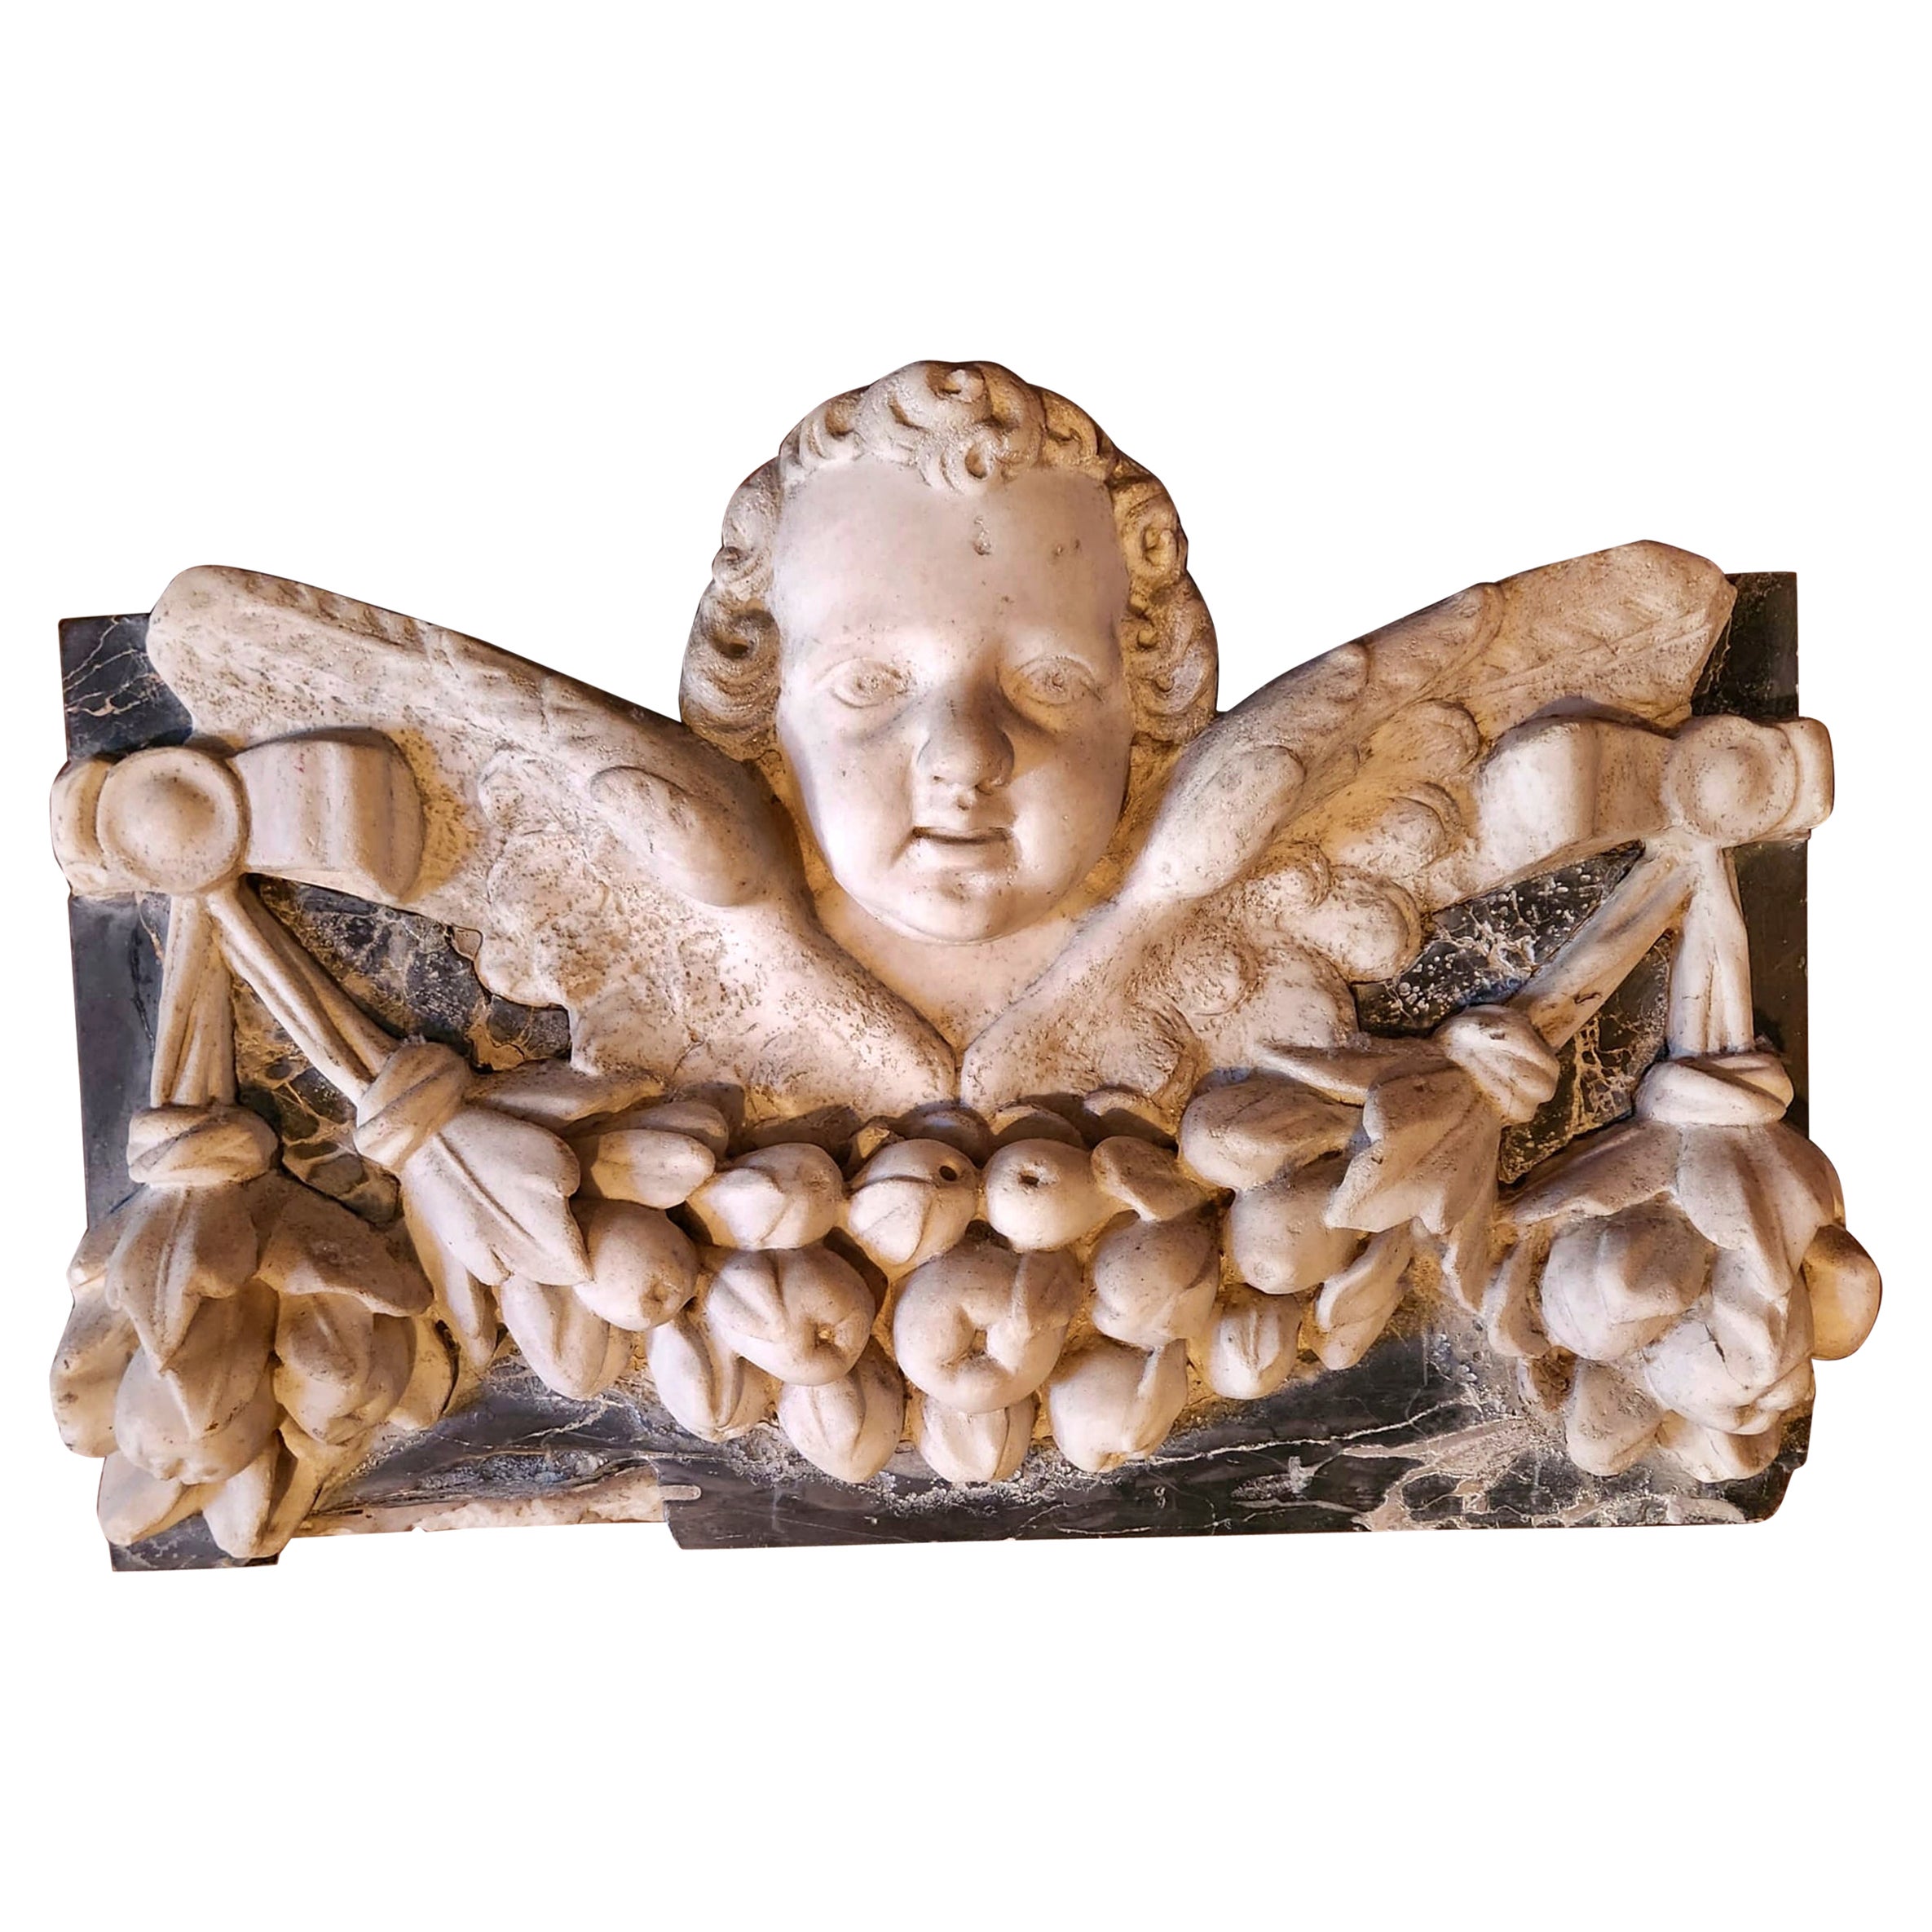 Rare Tuscan Marble Sculpture "Classic Happy Angel with Fruit Garland" 18th Cent. For Sale